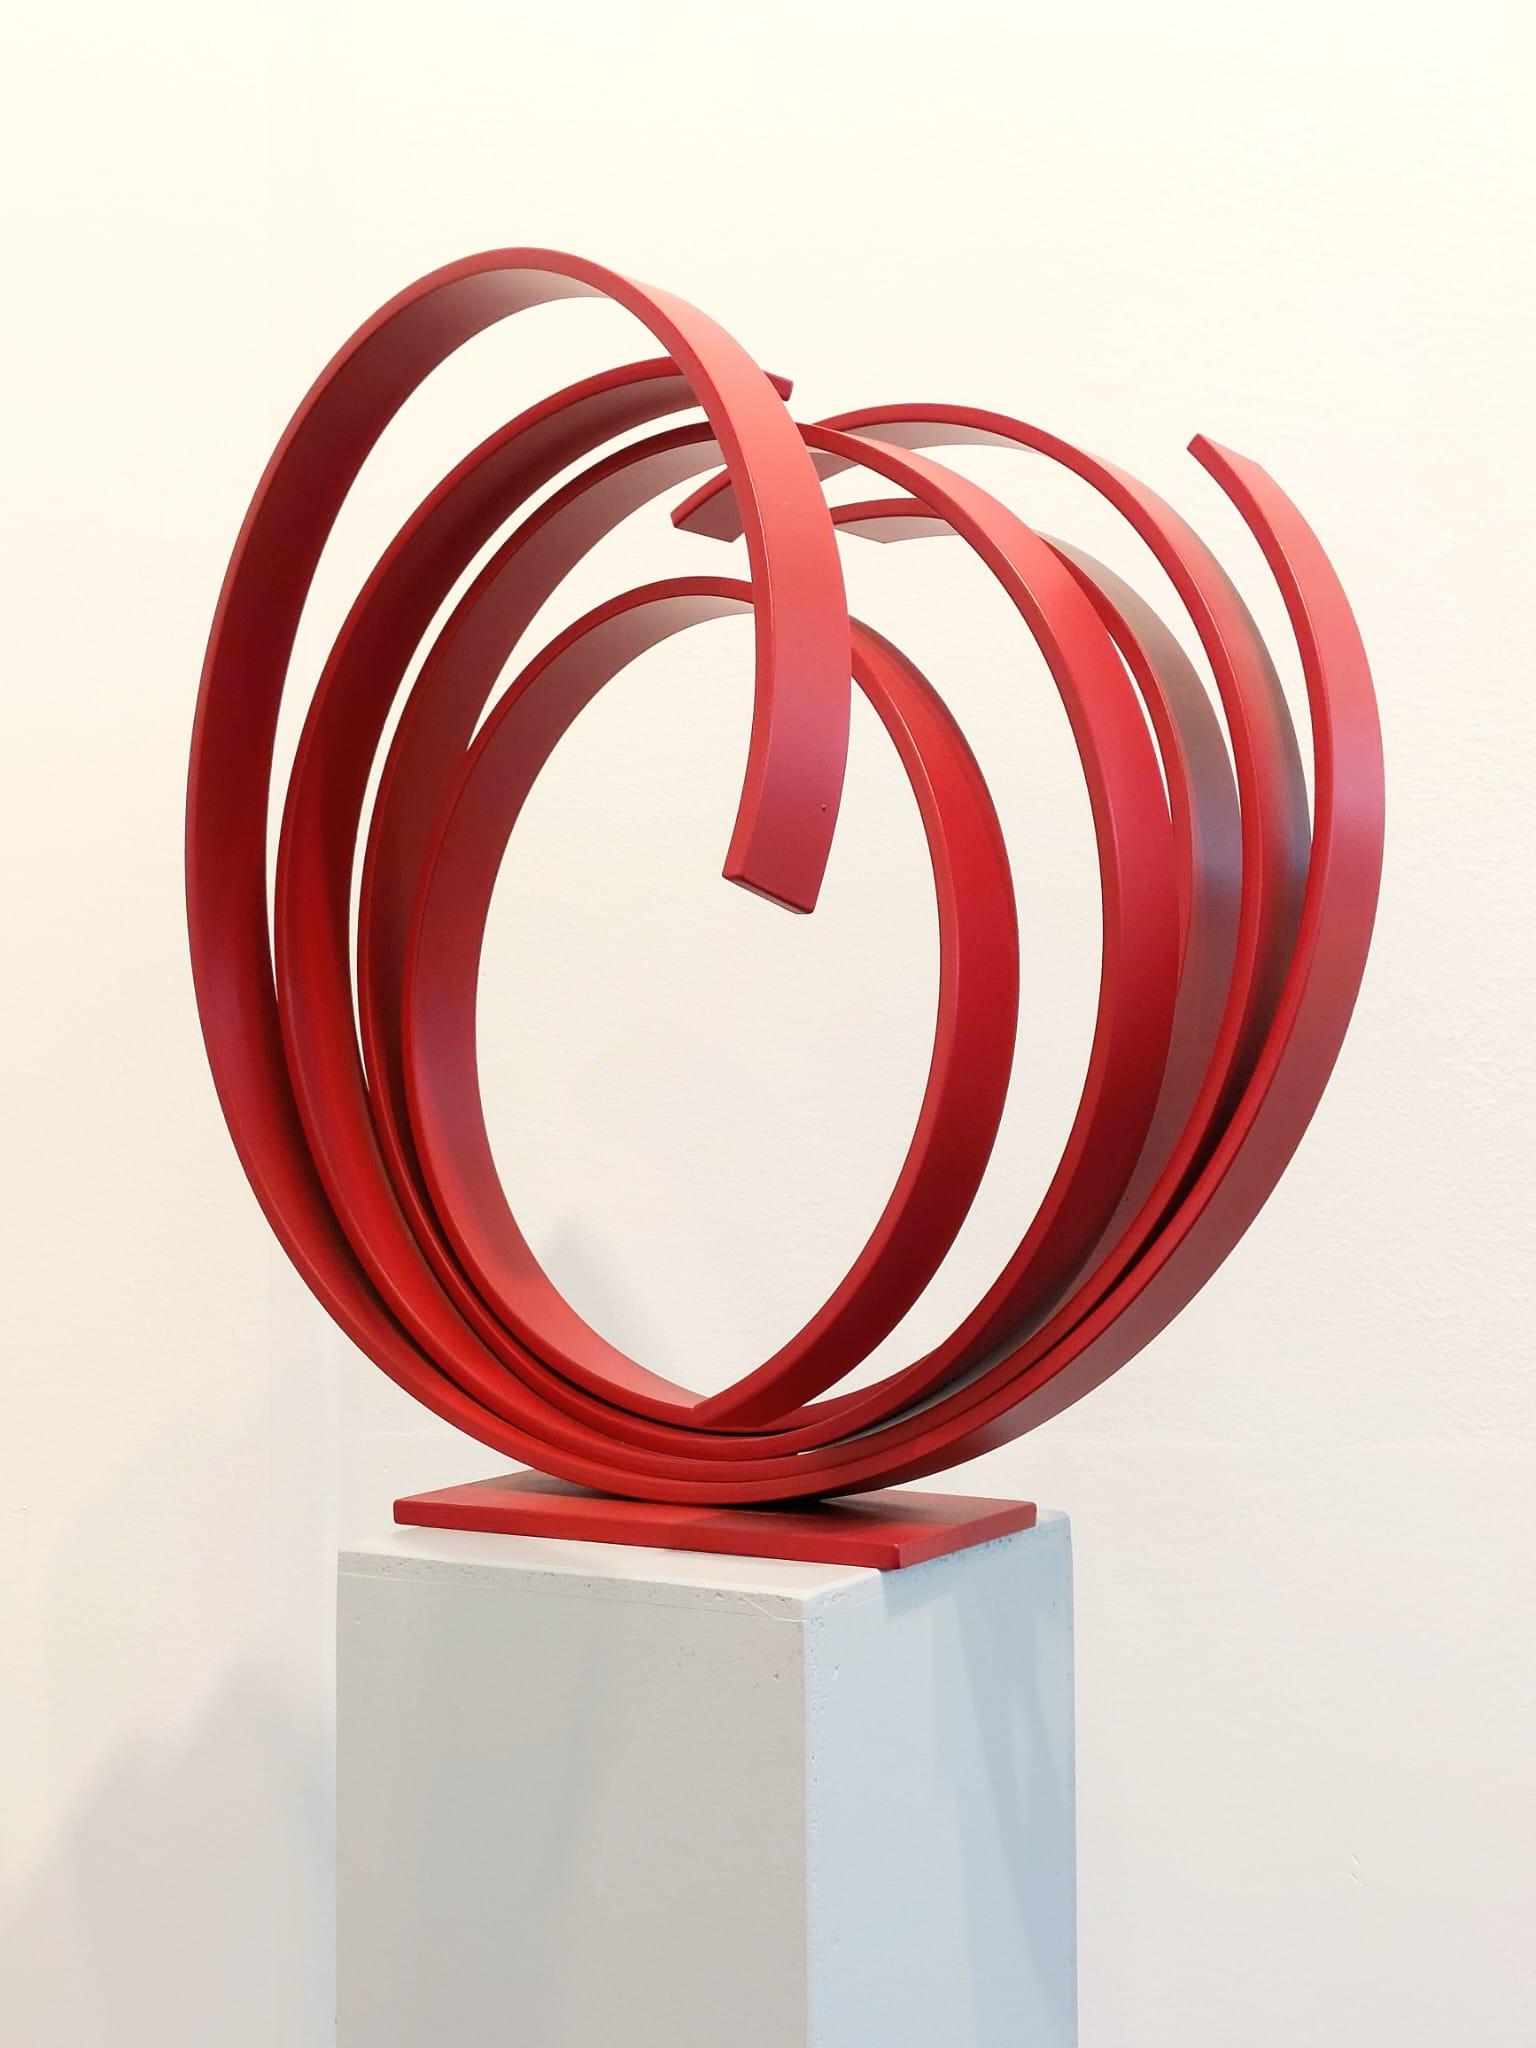 Red Orbit by Kuno Vollet - Large Contemporary Round Orbit sculpture  For Sale 4